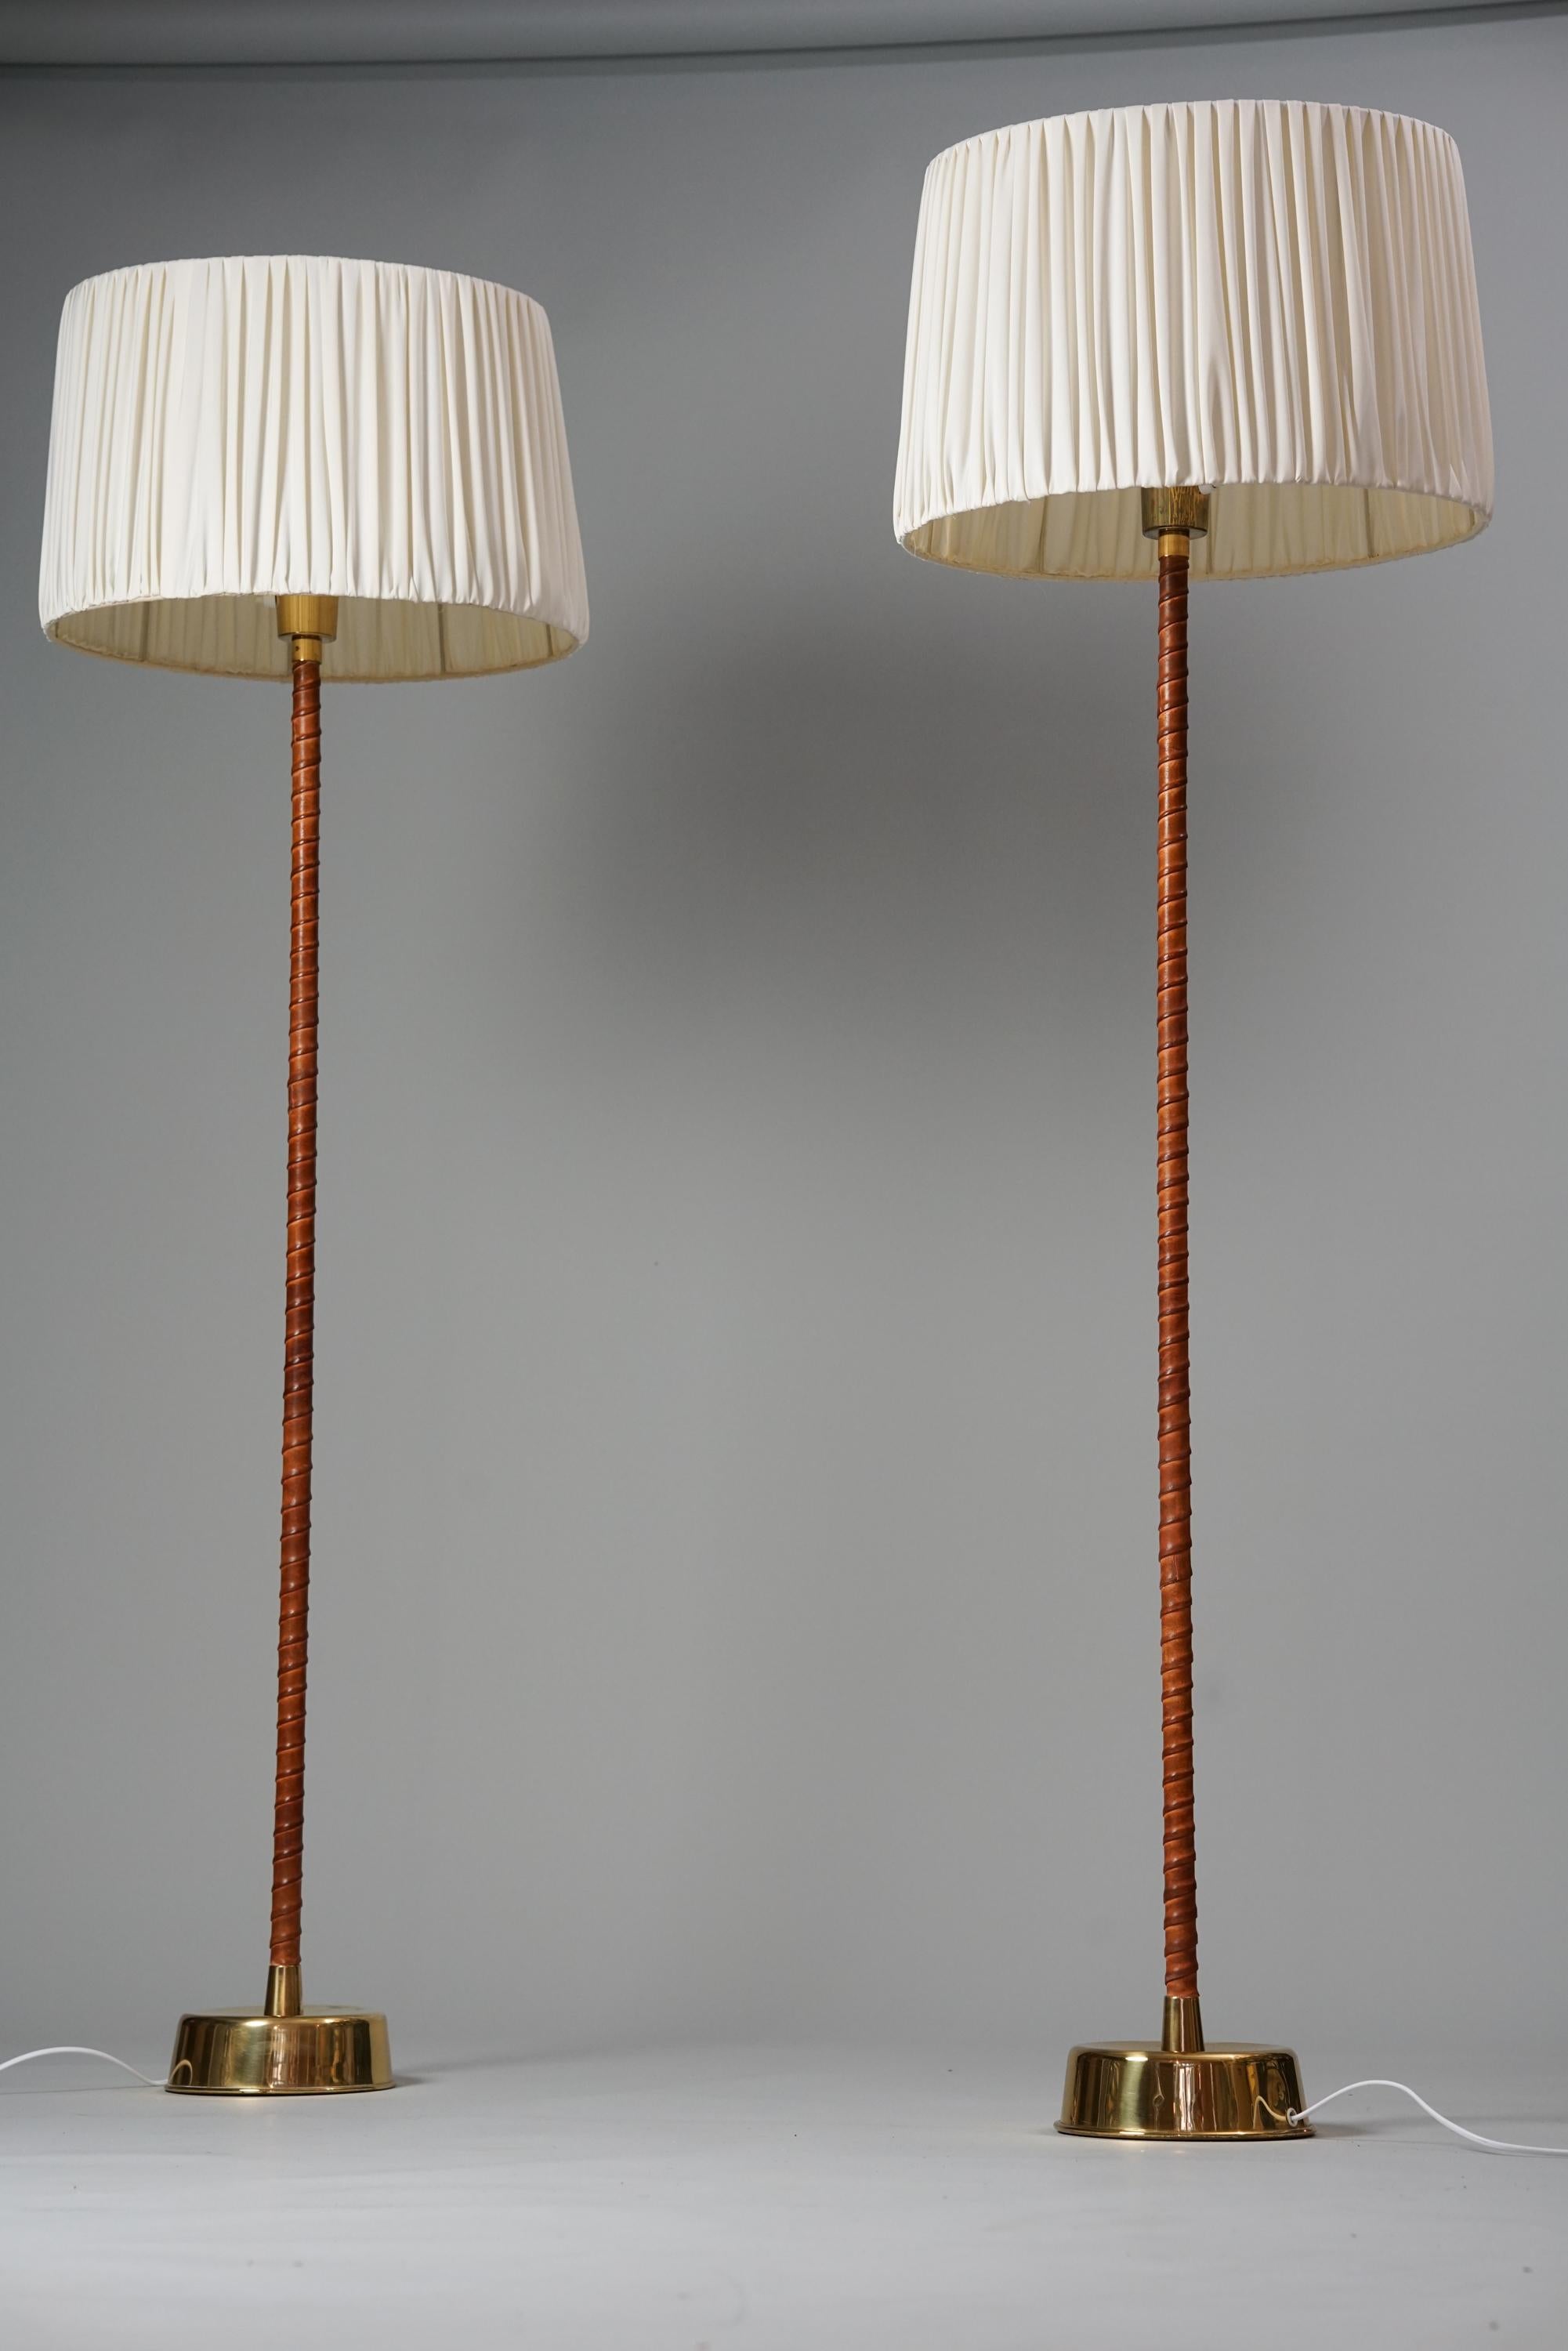 Pair of Senator floor lamps, design Lisa Johansson-Pape, manufactured by Orno Oy, 1950s. Leather and brass with cotton lampshades. Good vintage condition, minor patina consistent with age and use. The floor lamps are sold as a set. 

Lisa